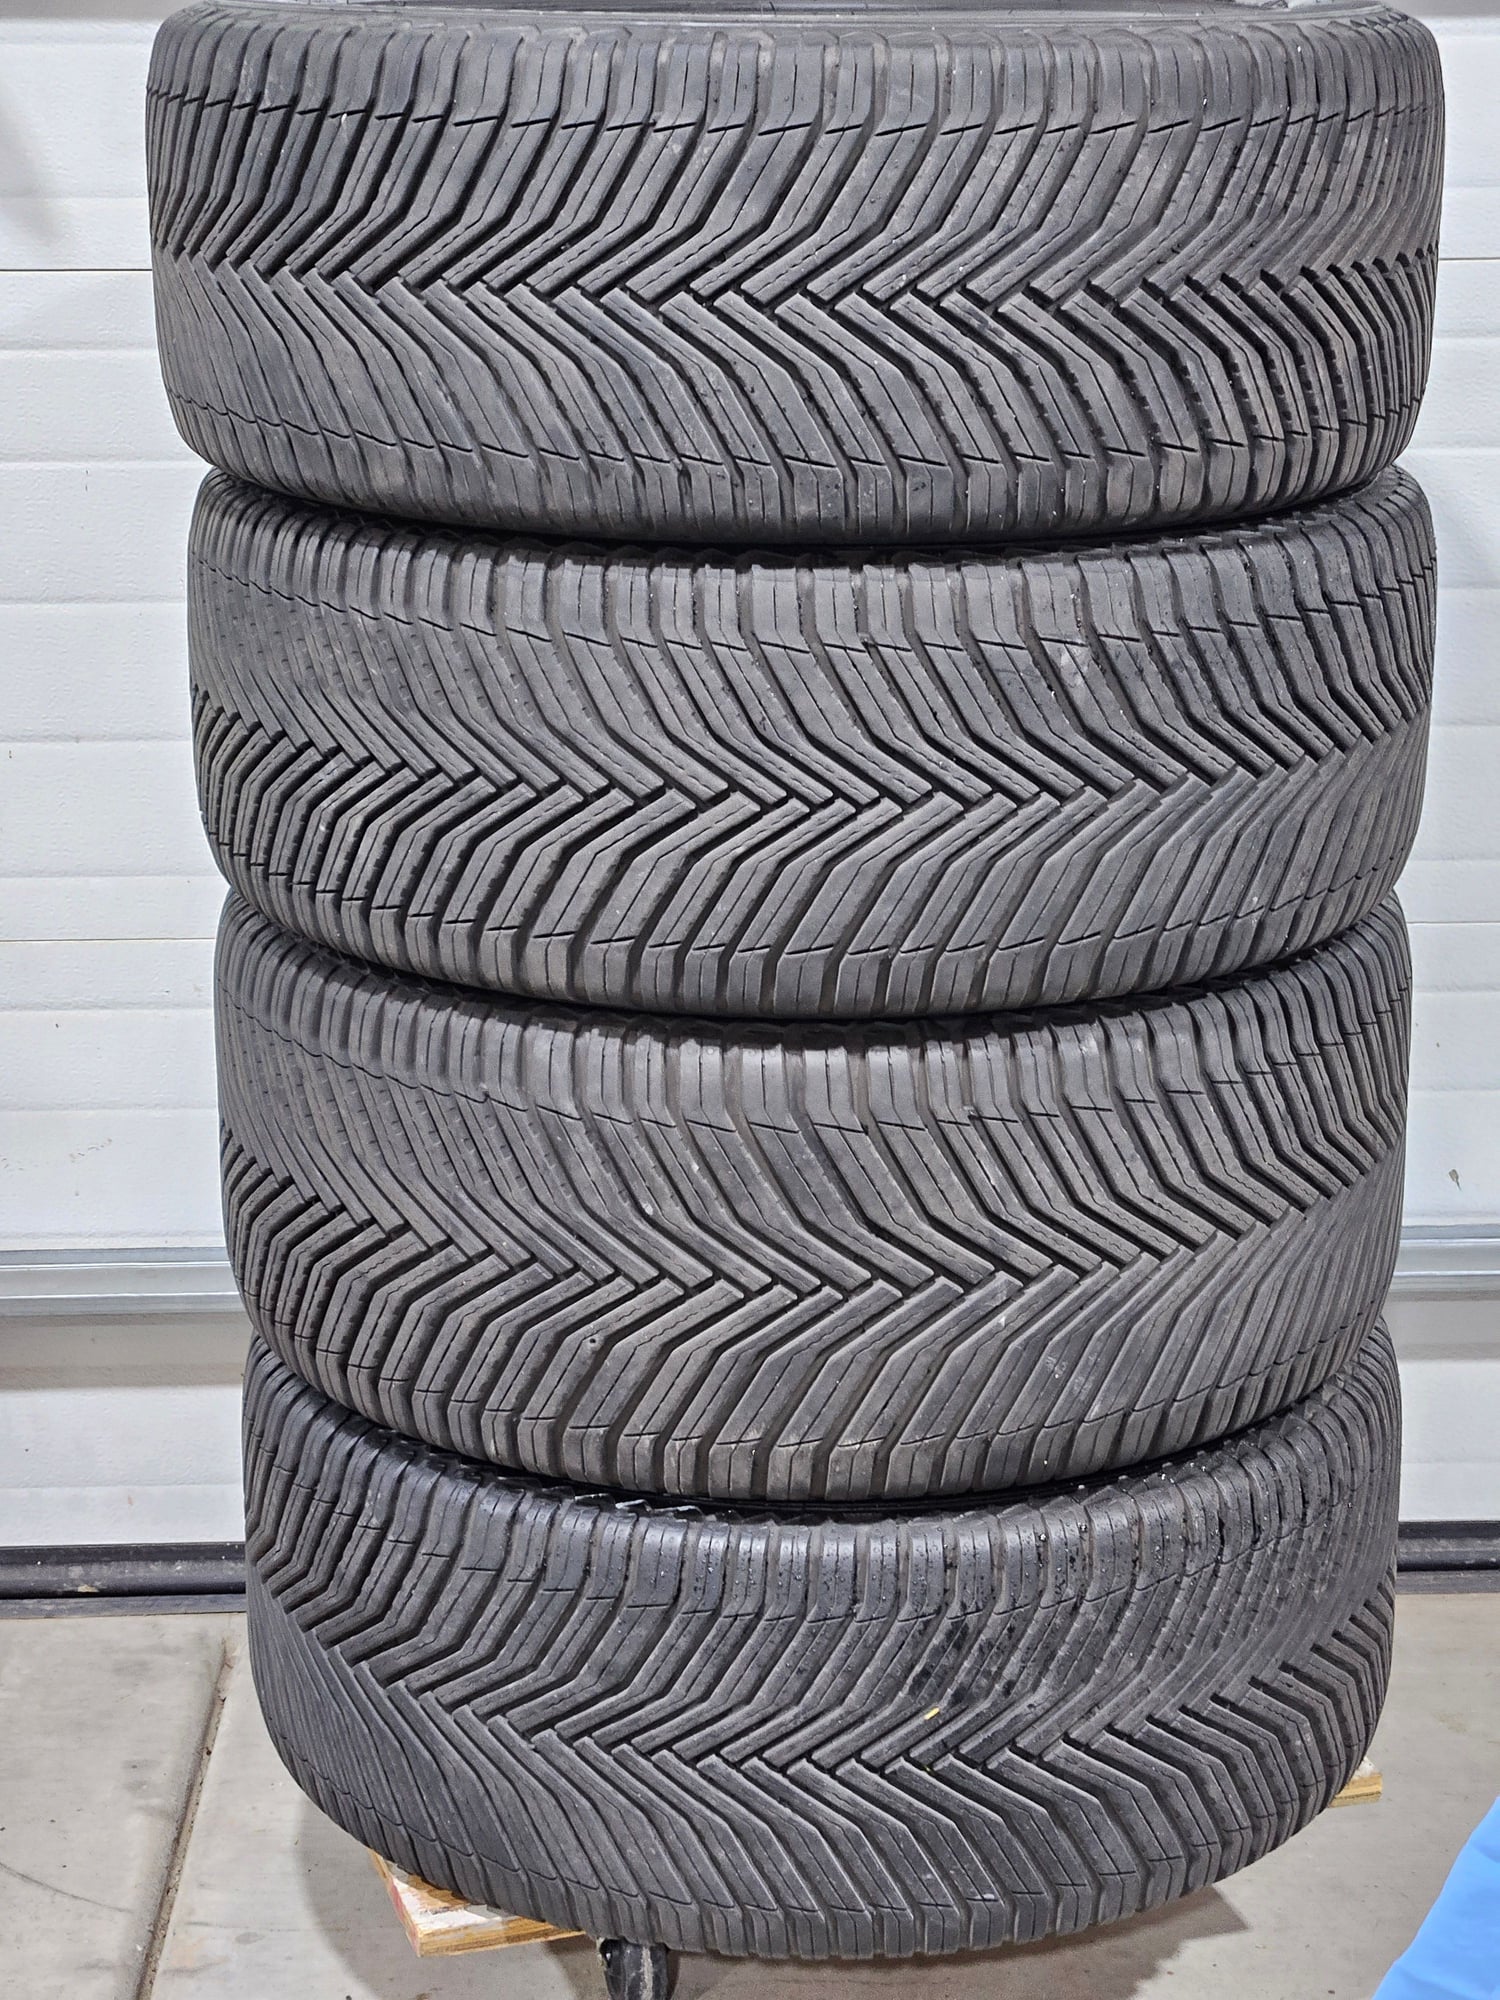 Wheels and Tires/Axles - Ditch the RUNFLATS! For Sale Michelin Crosscountry2 (2) 285/40 R20 & (2) 255/45R20 - Used - 0  All Models - Tucson, AZ 85750, United States